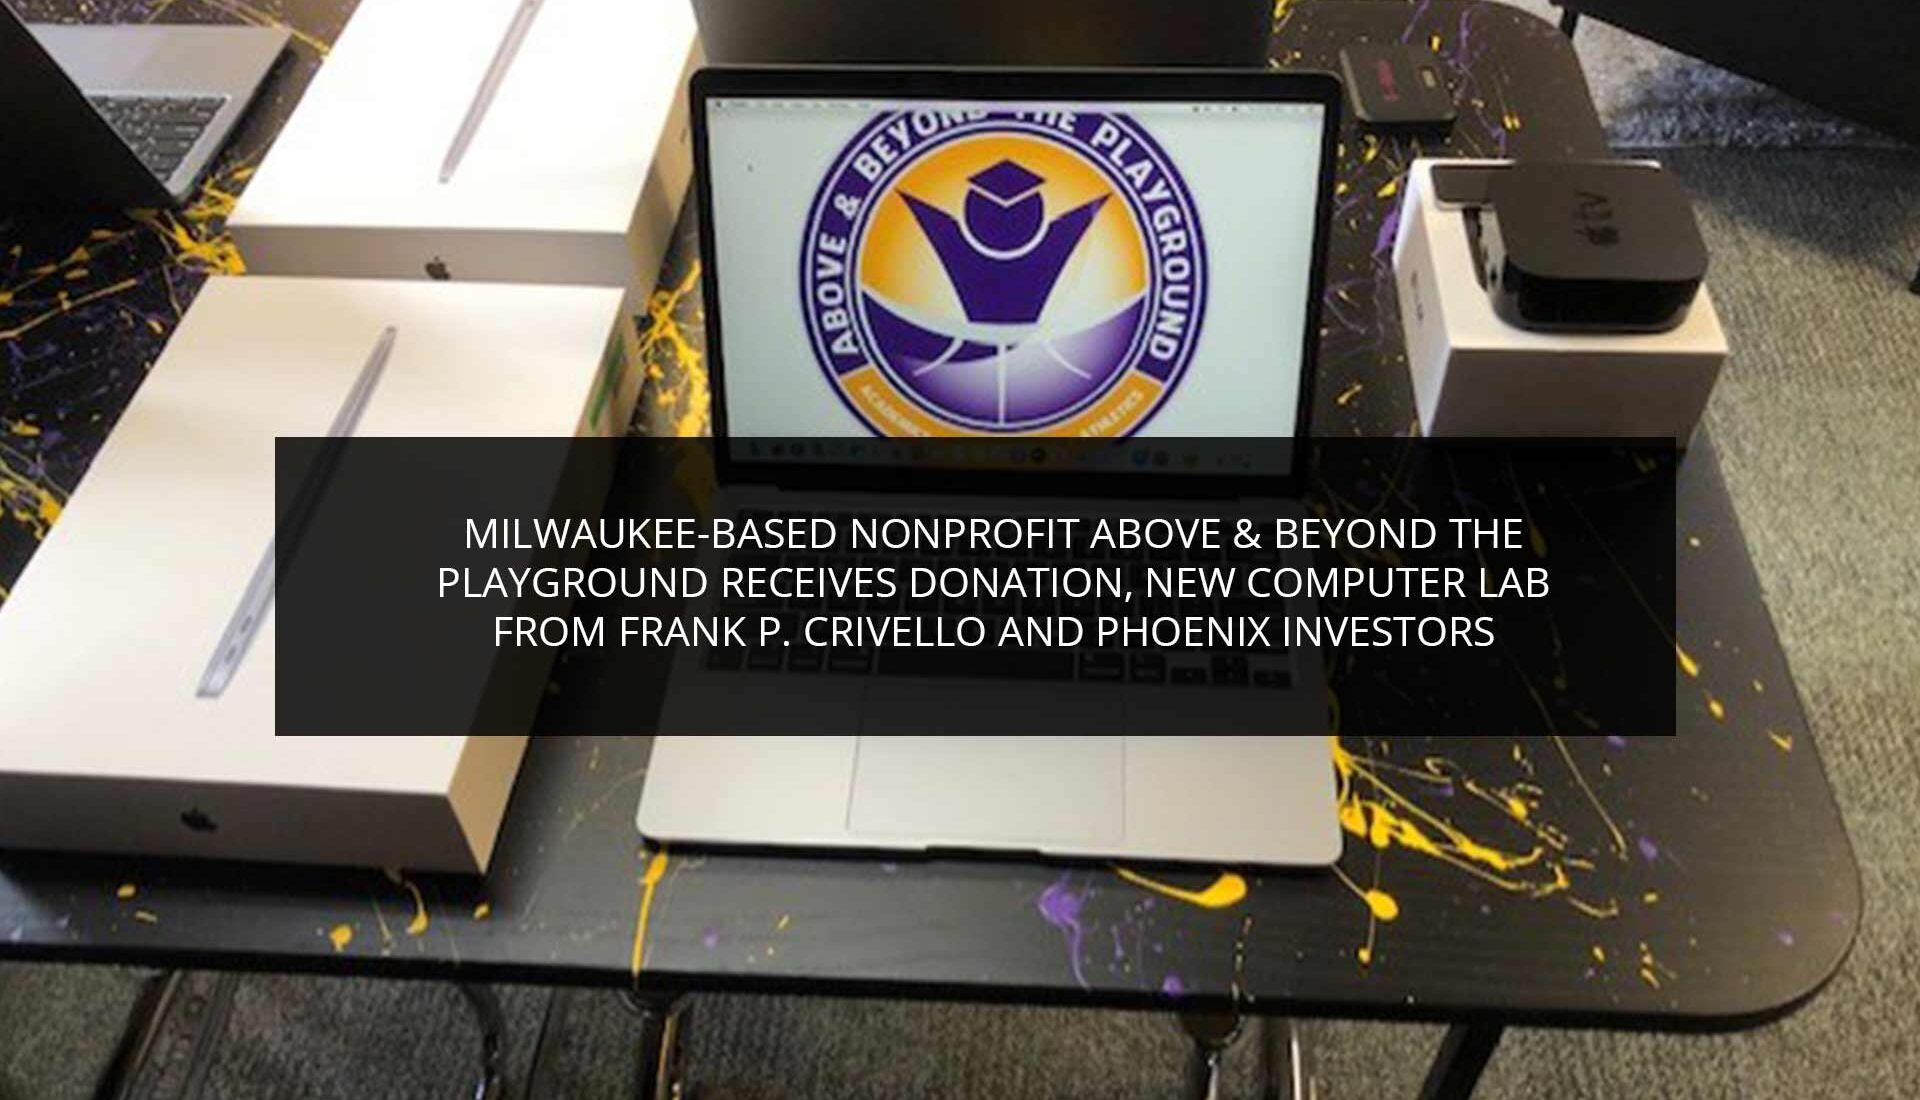 Milwaukee-Based Nonprofit Above & Beyond the Playground Receives Donation, New Computer Lab From Frank P. Crivello And Phoenix Investors